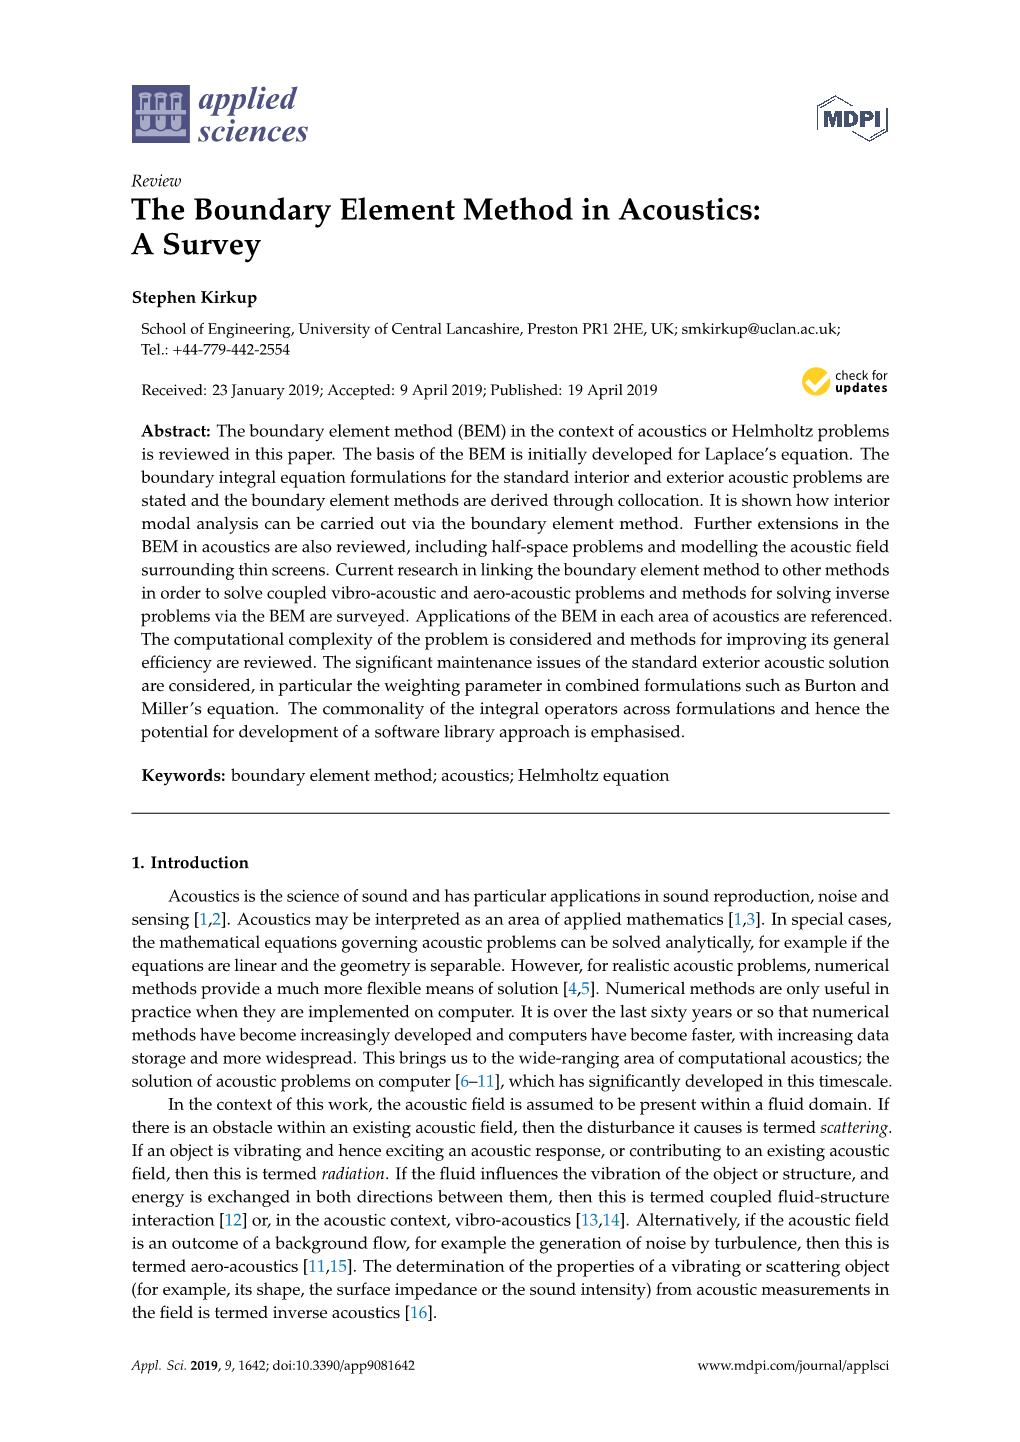 The Boundary Element Method in Acoustics: a Survey